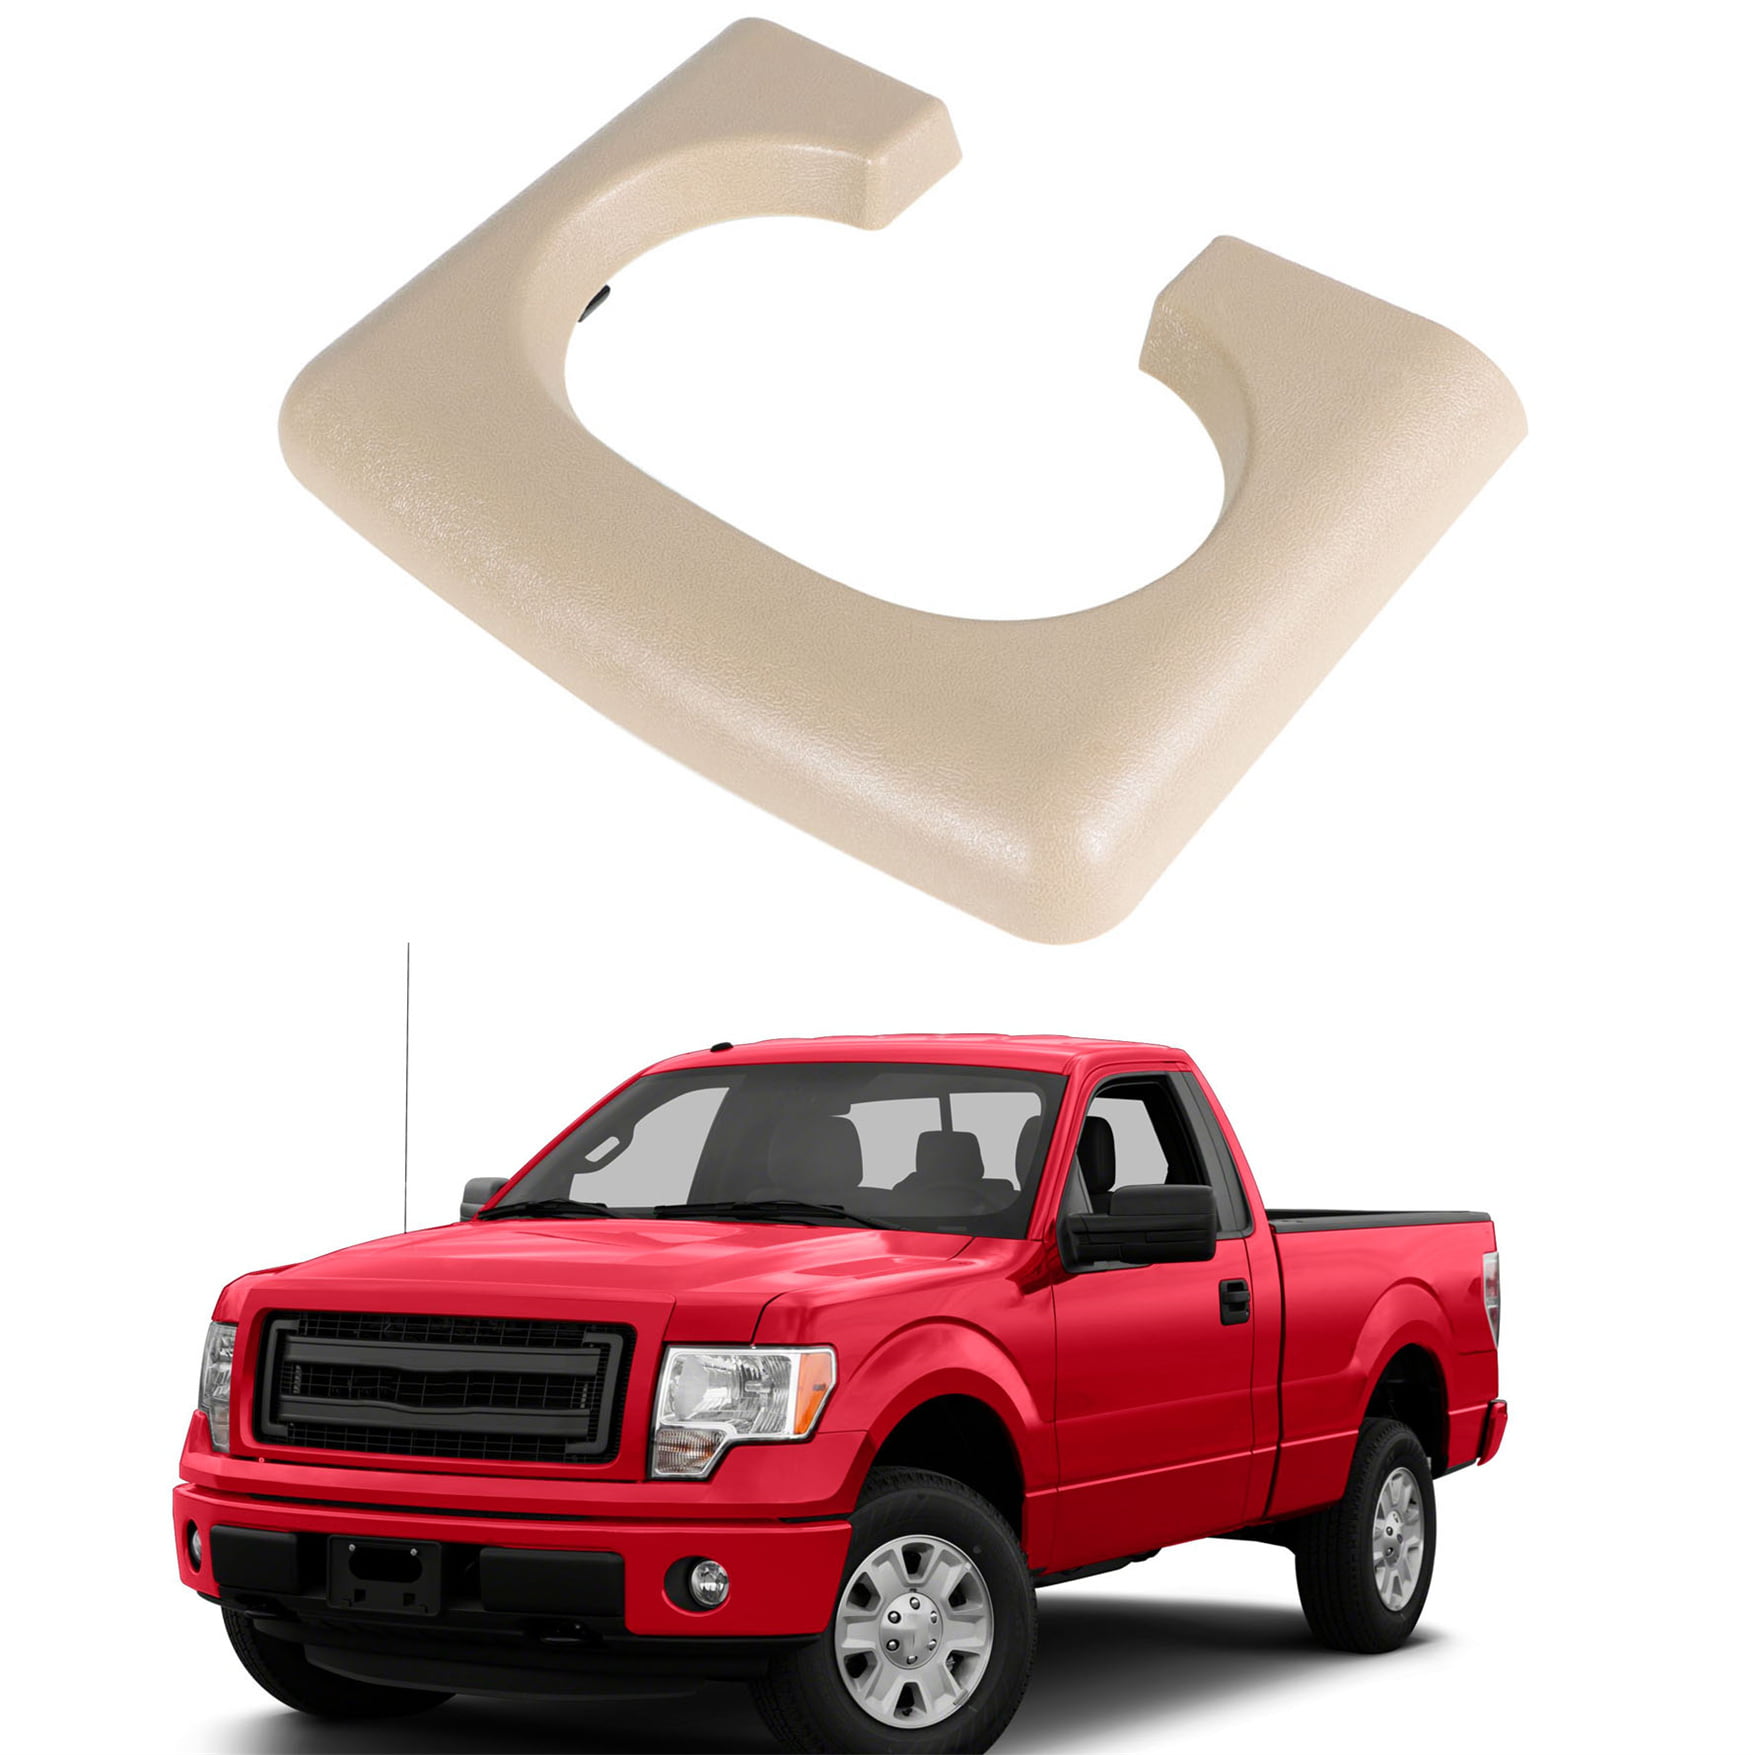 Center Console Cup Holder Replacement Pad Tan Color For Ford F150 2004-2014